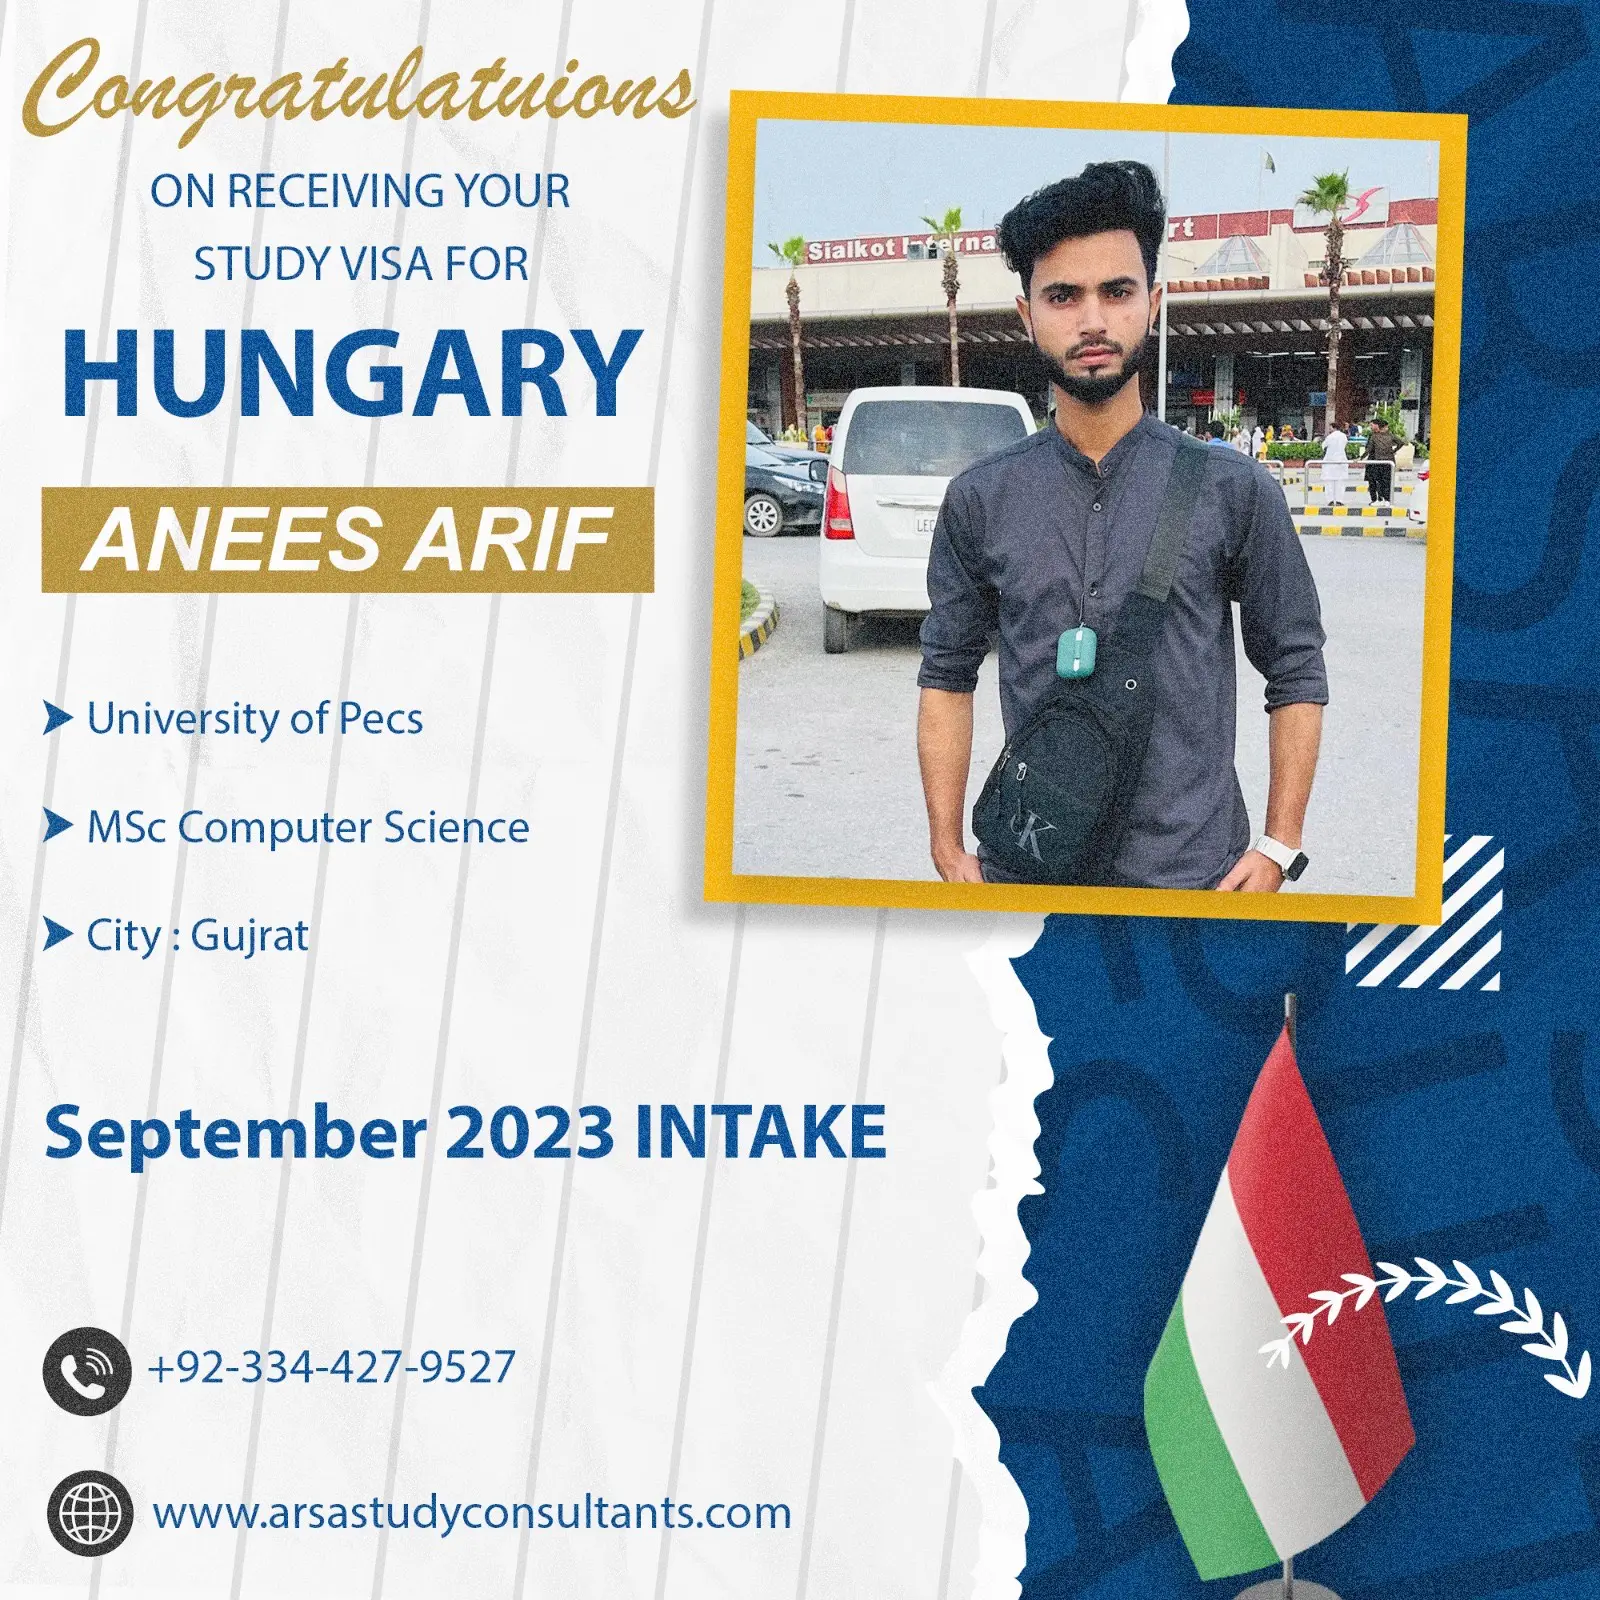 Congratulation Anees Arif For Getting Hungary Study VISA 2023 By ARSA Study VISA Consultants